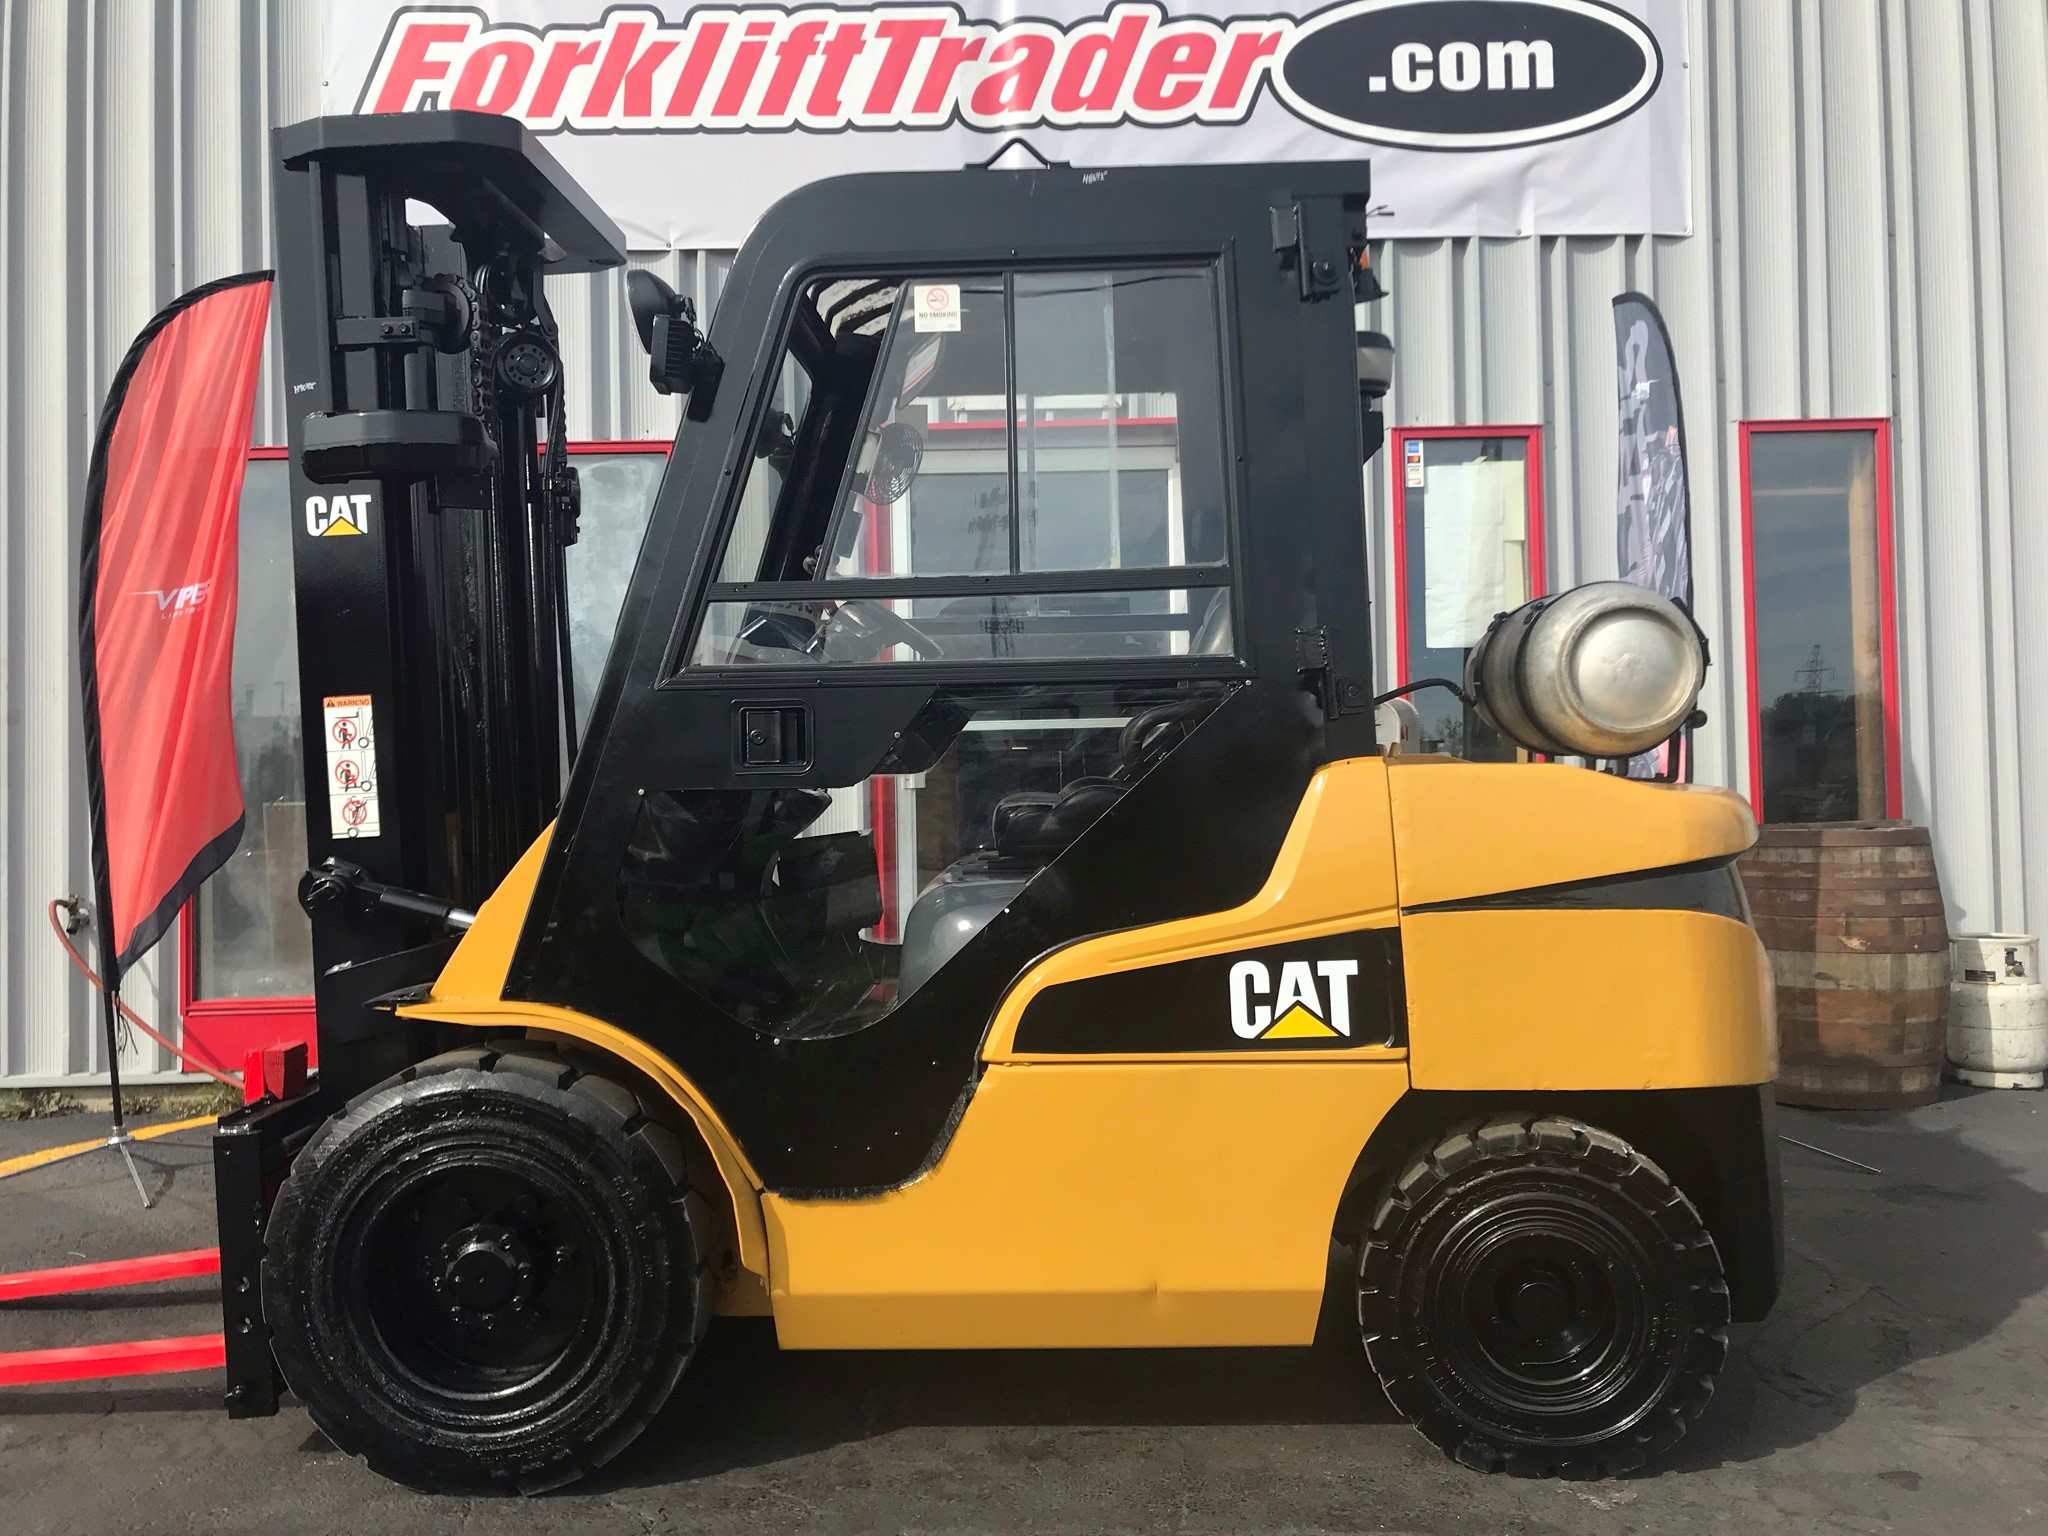 186" lift height yellow 2014 caterpillar forklift for sale